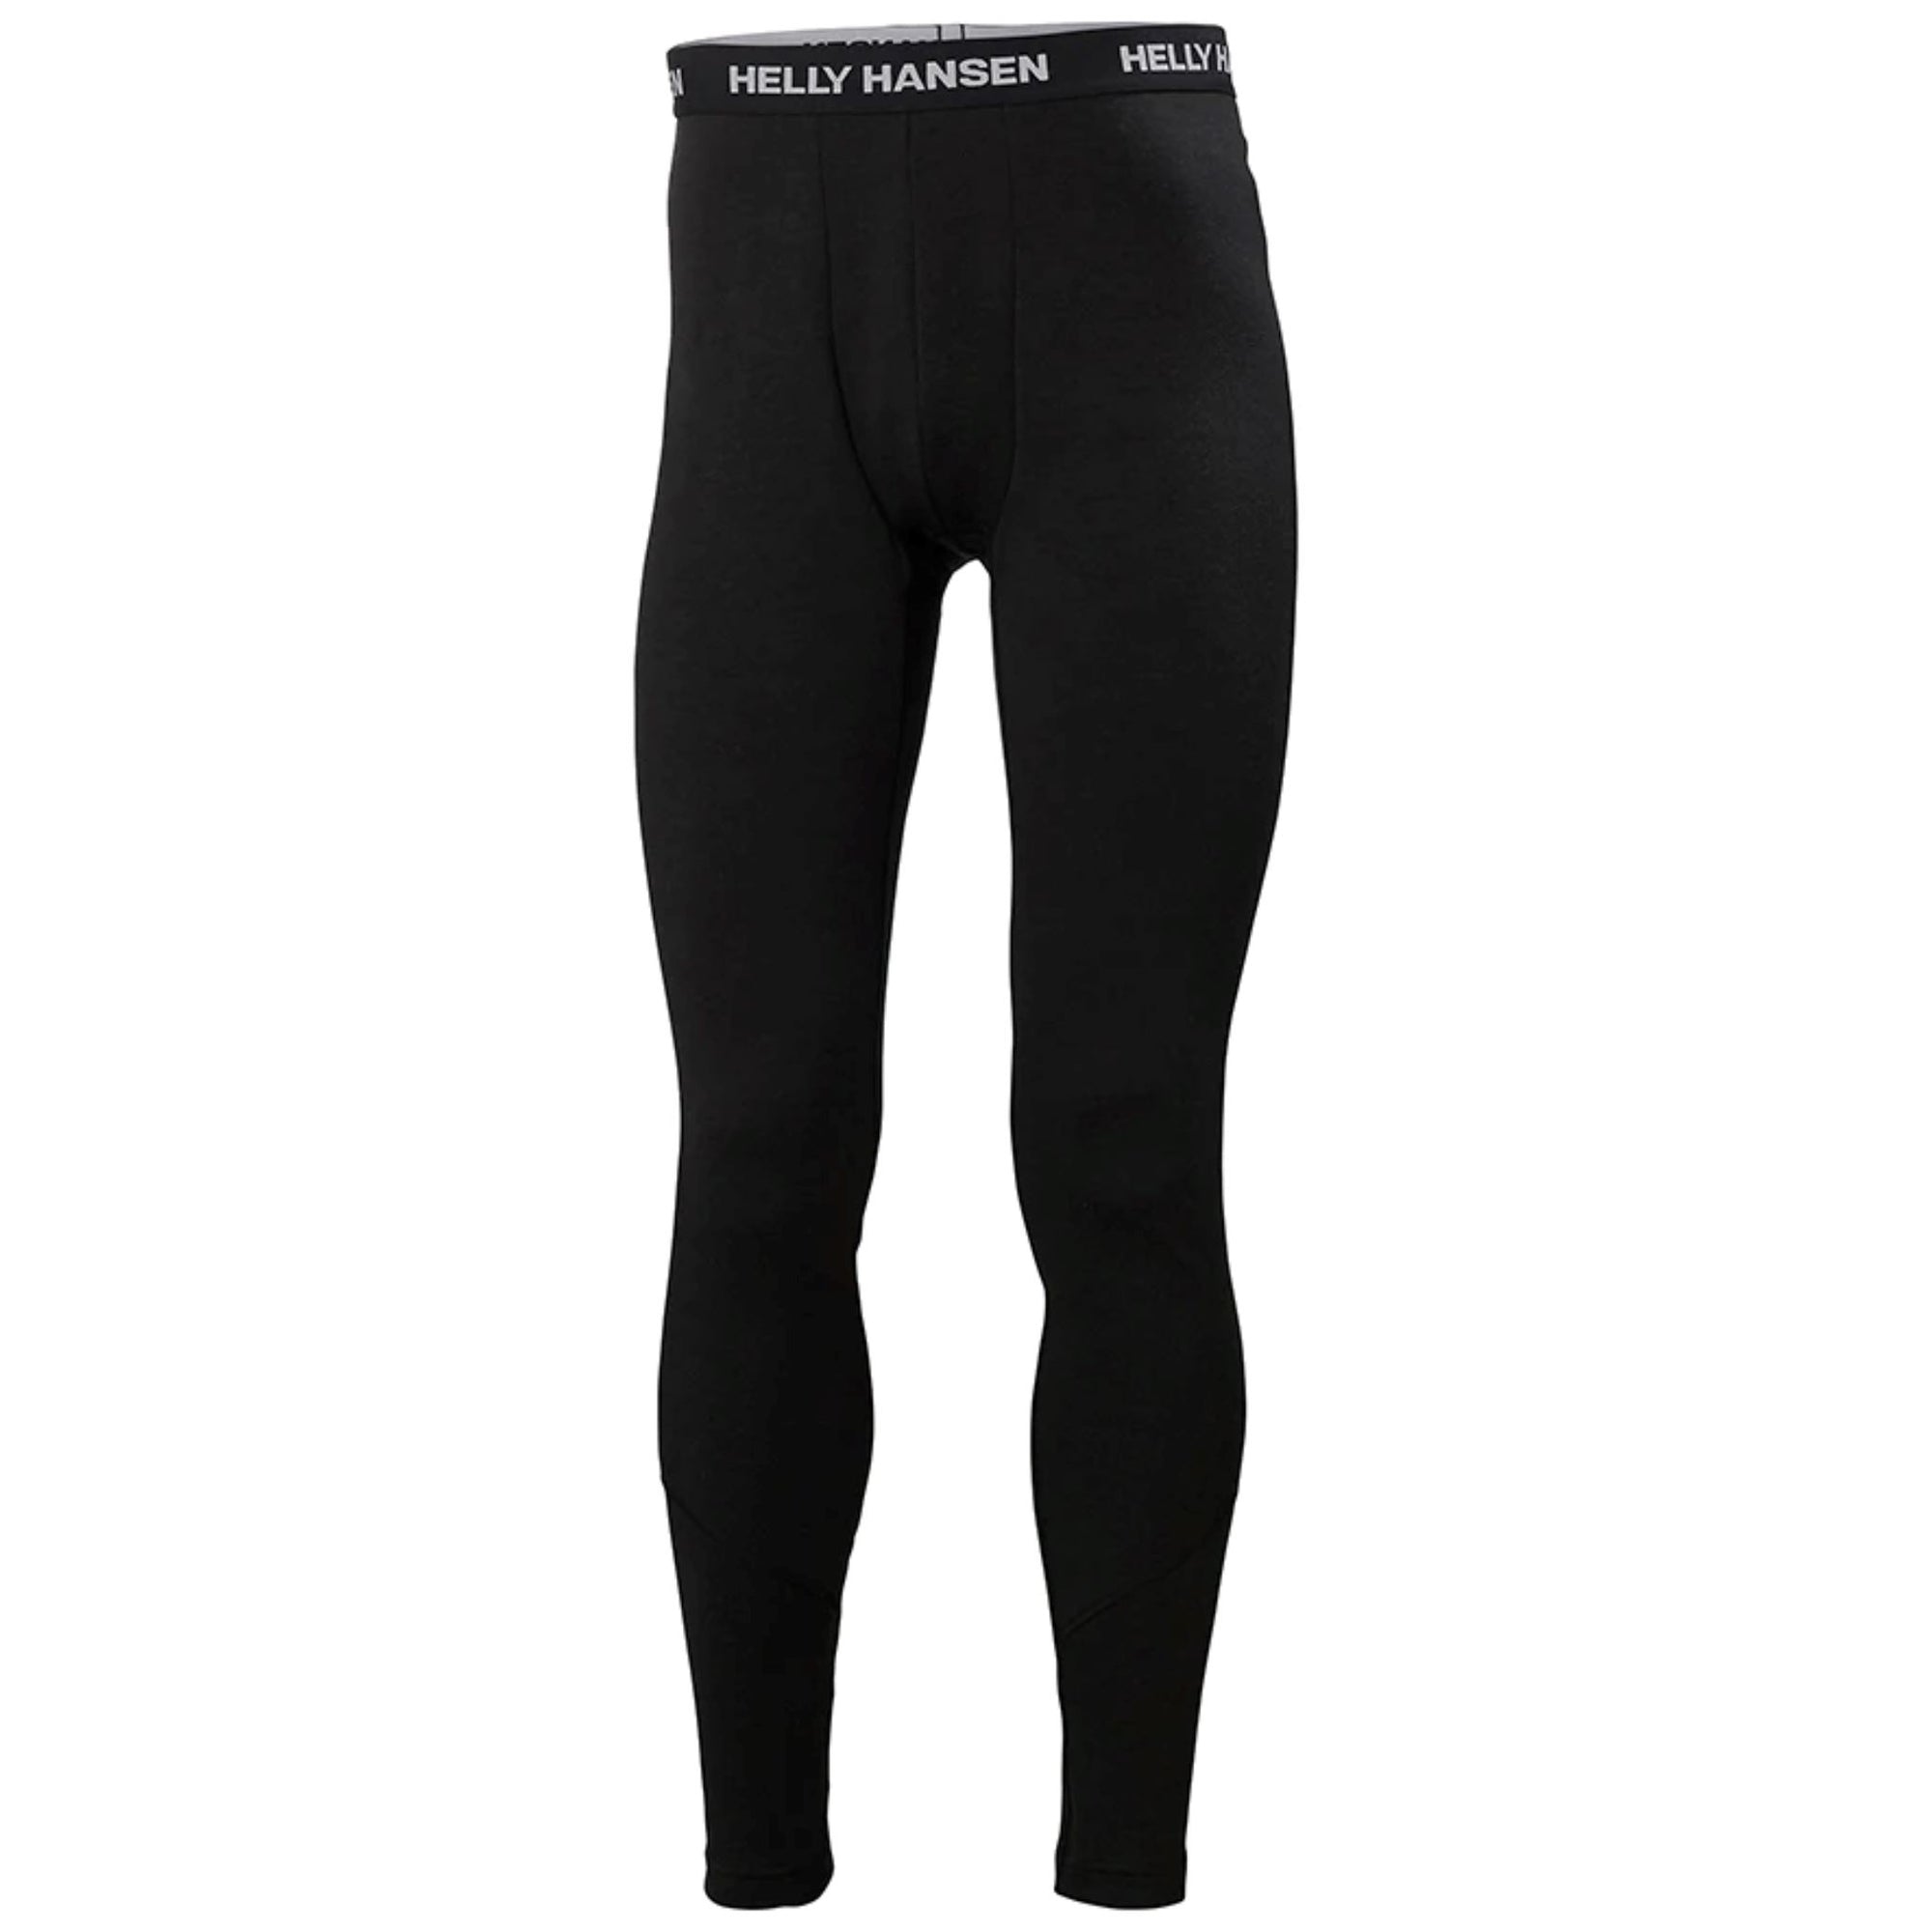 Mens Helly Hansen LIFA Merino Midweight (225g) Thermal Pant - Black Thermals Helly Hansen S INTL / S AU 